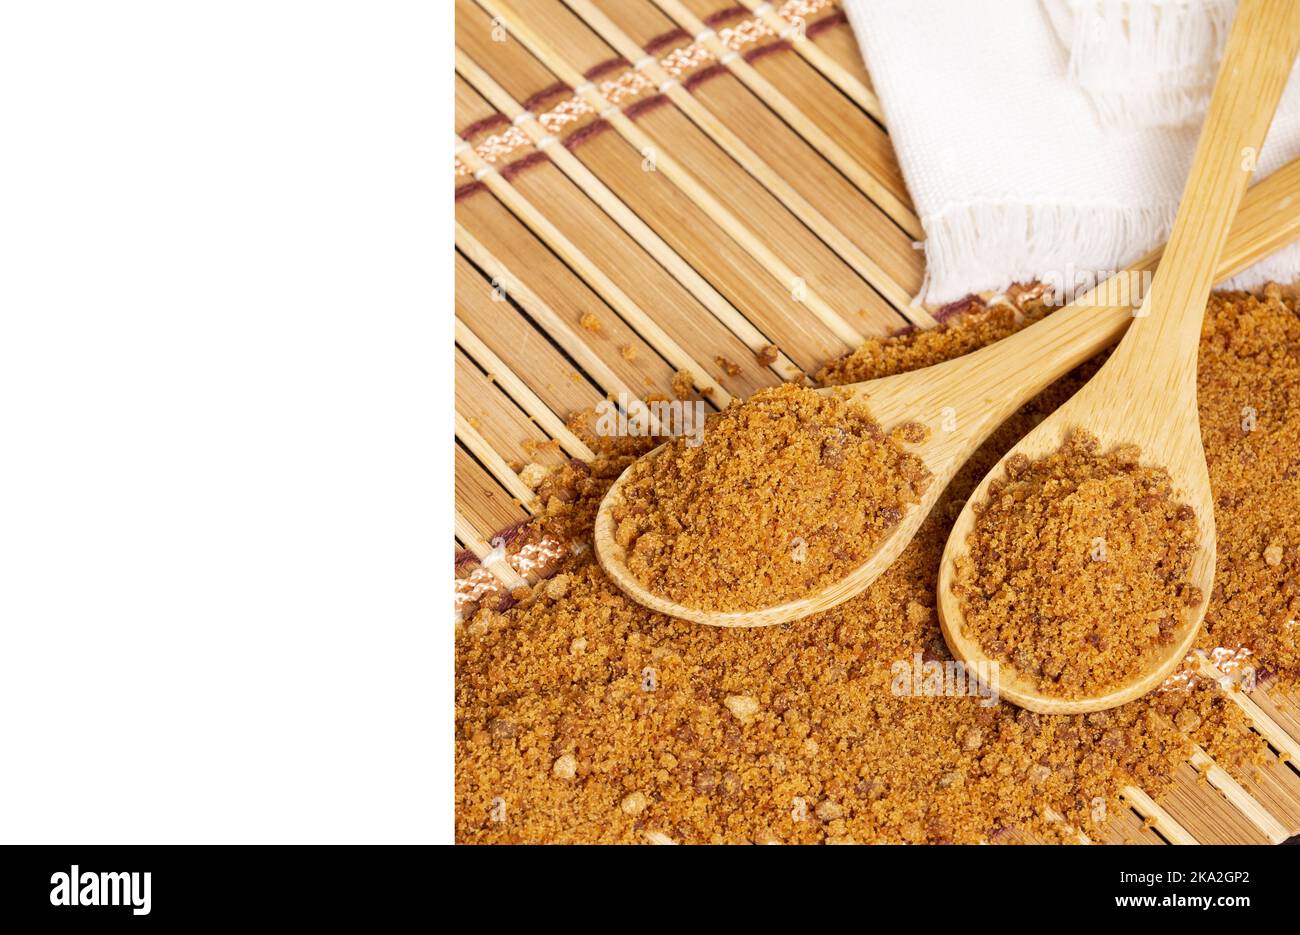 Panela or sugar cane candy - Saccharum officinarum; Photo With White Stripe For Text Stock Photo